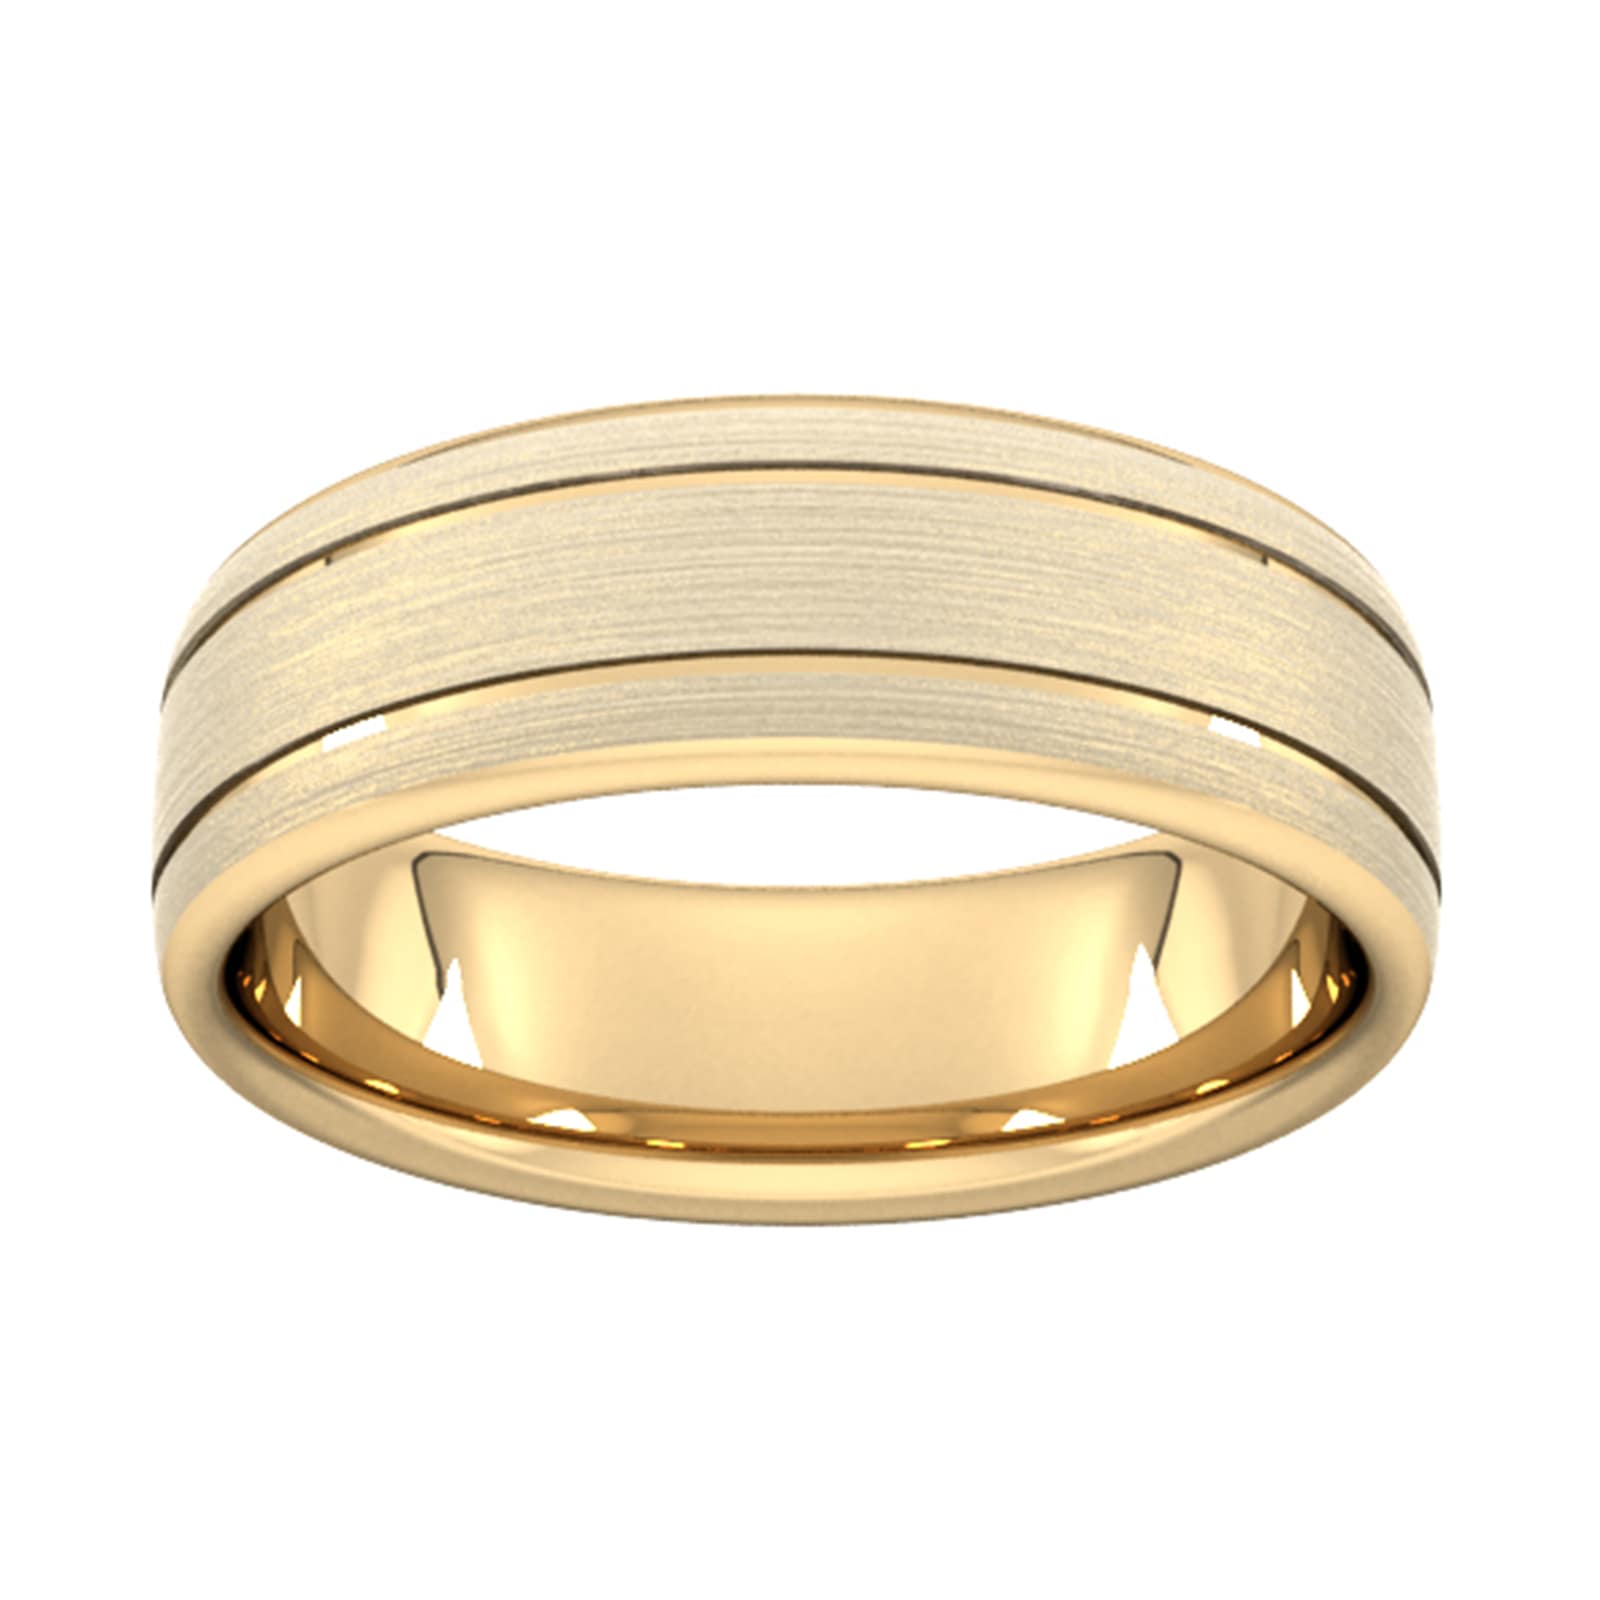 7mm Flat Court Heavy Matt Finish With Double Grooves Wedding Ring In 18 Carat Yellow Gold - Ring Size U